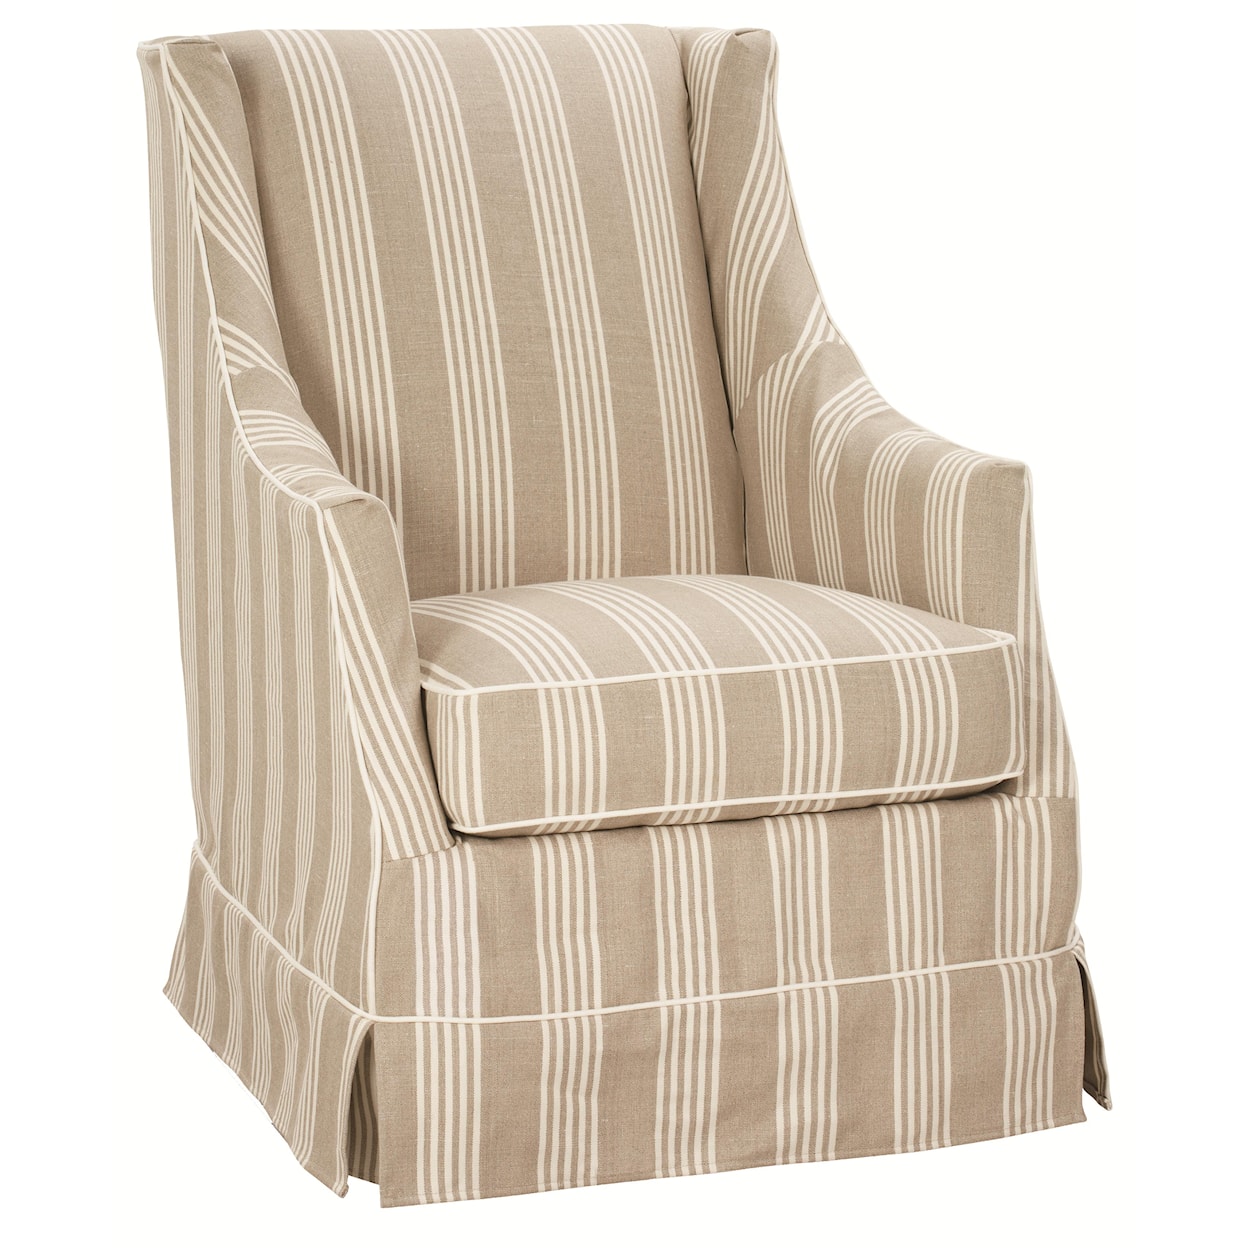 Robin Bruce Accent Chairs Hayward Slipcovered Skirted Chair